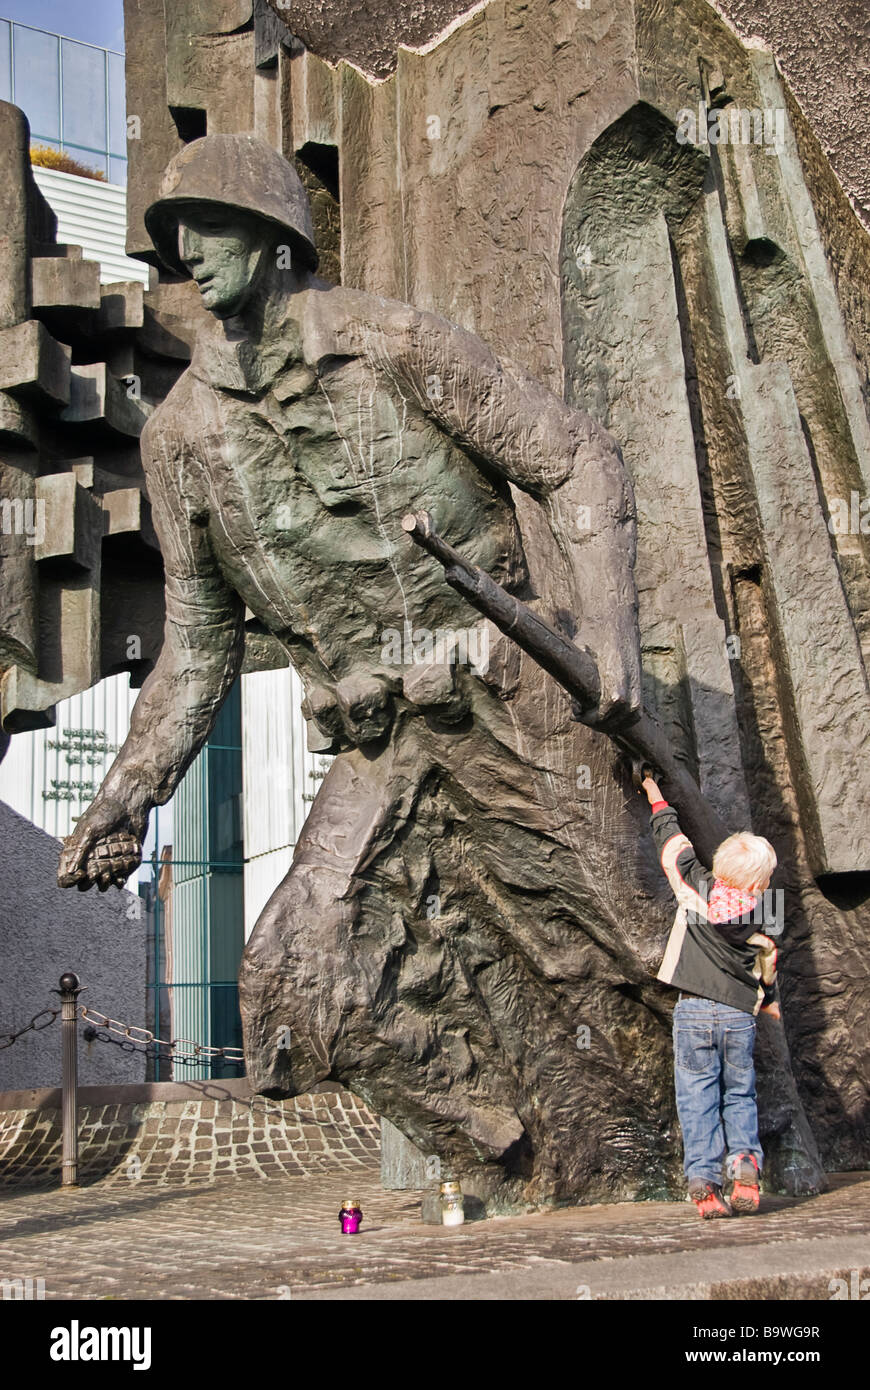 Boy pulling the trigger of an statue´s gun, Warsaw, Poland, Europe. Stock Photo